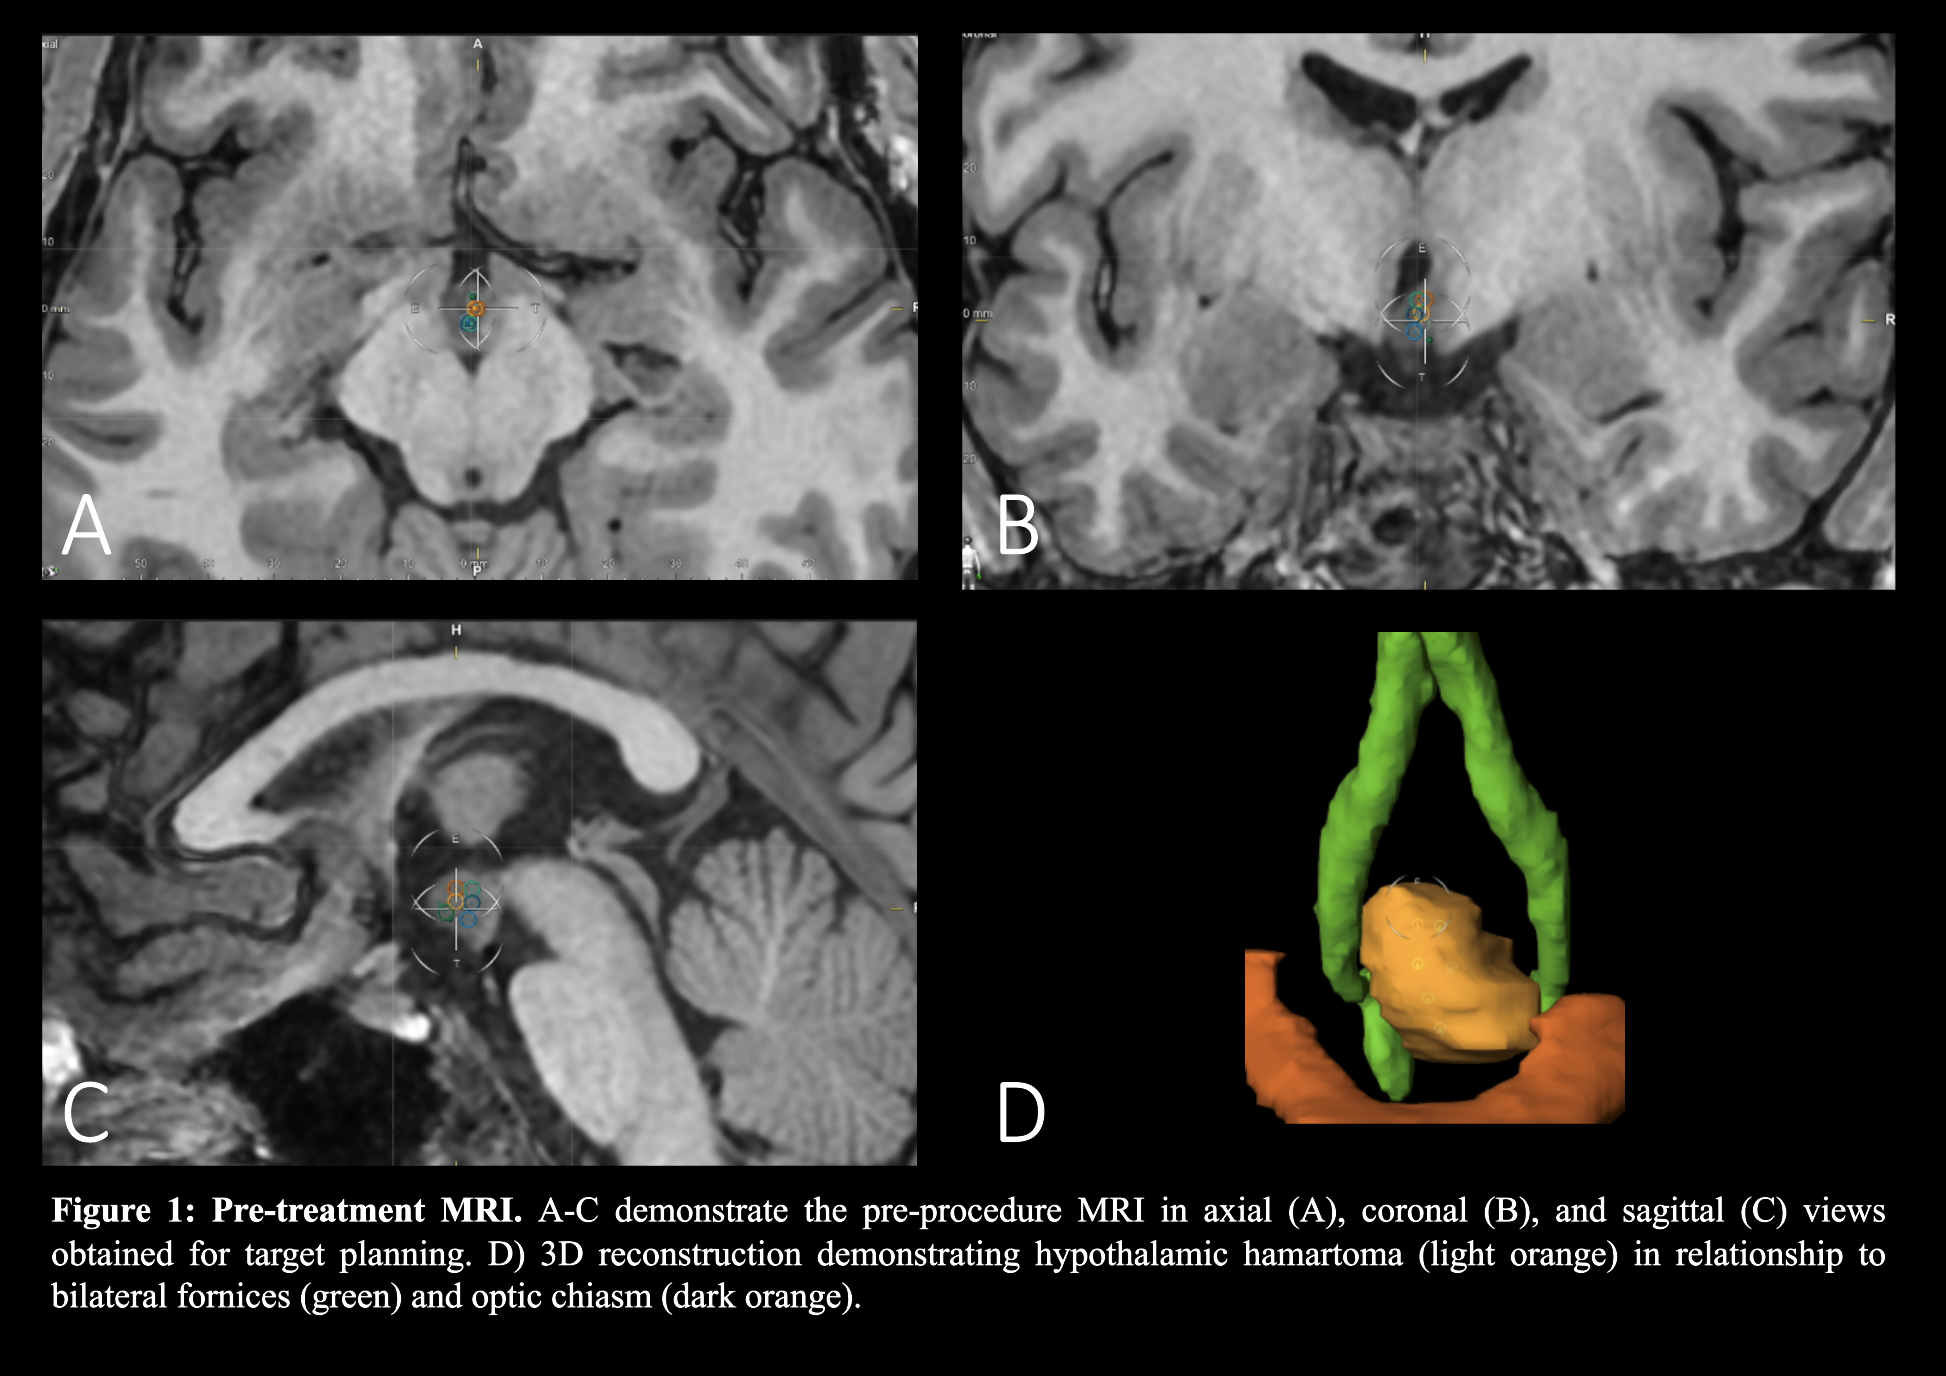 high-intensity focused ultrasound for treatment of hypothalamic ...